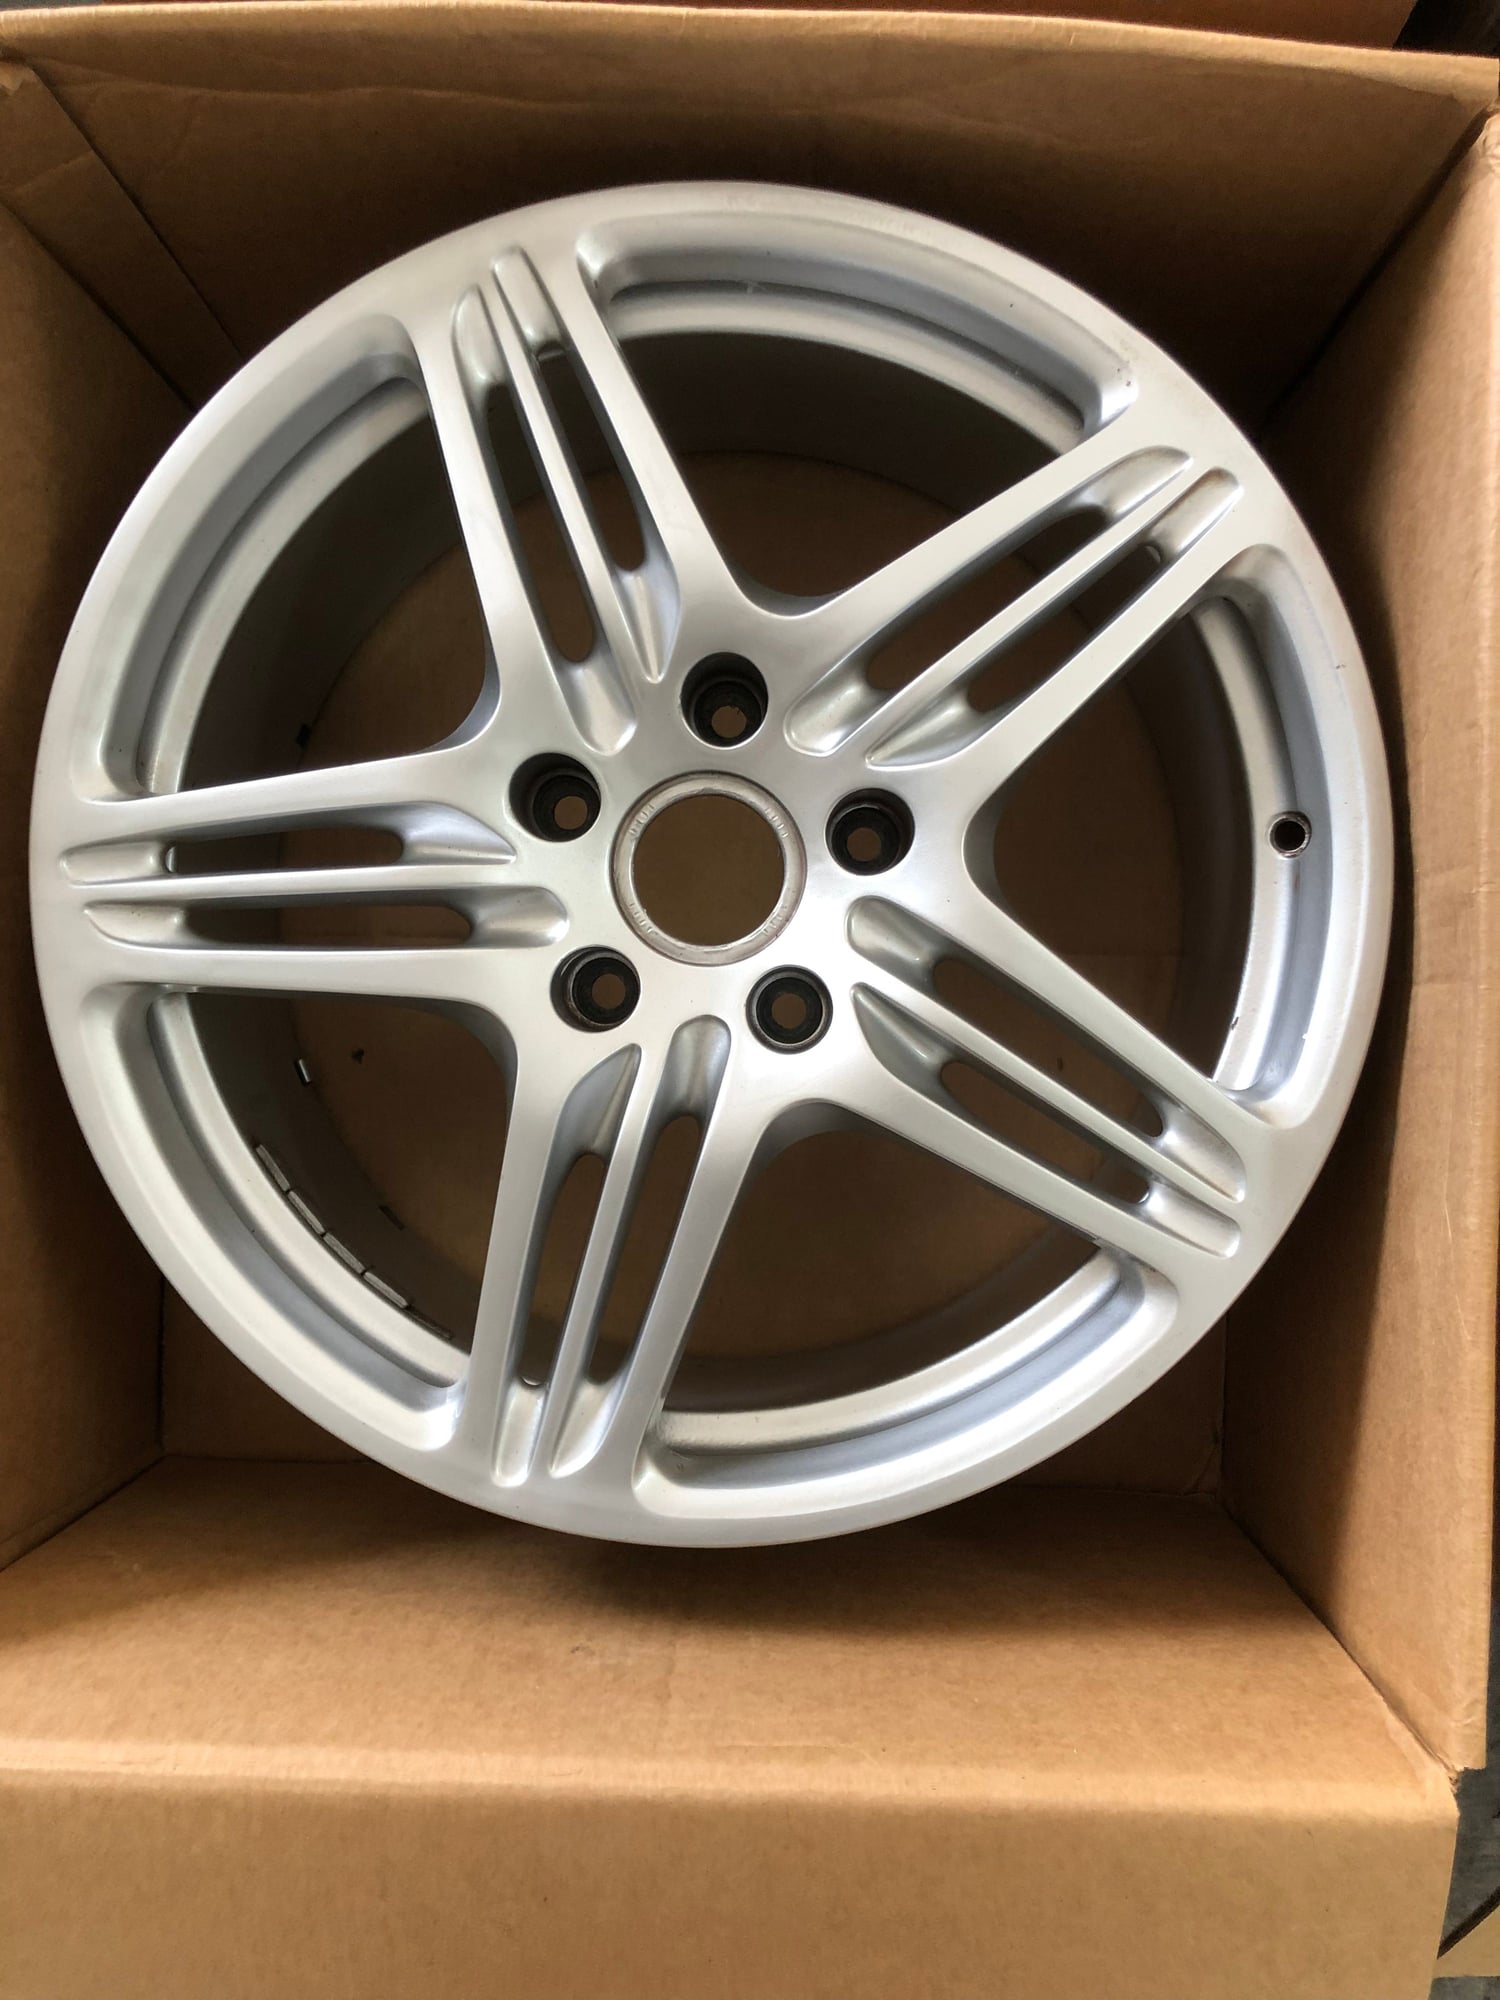 Wheels and Tires/Axles - 997.1 Turbo wheels - Used - 2001 to 2011 Porsche 911 - West Melbourne, FL 32904, United States